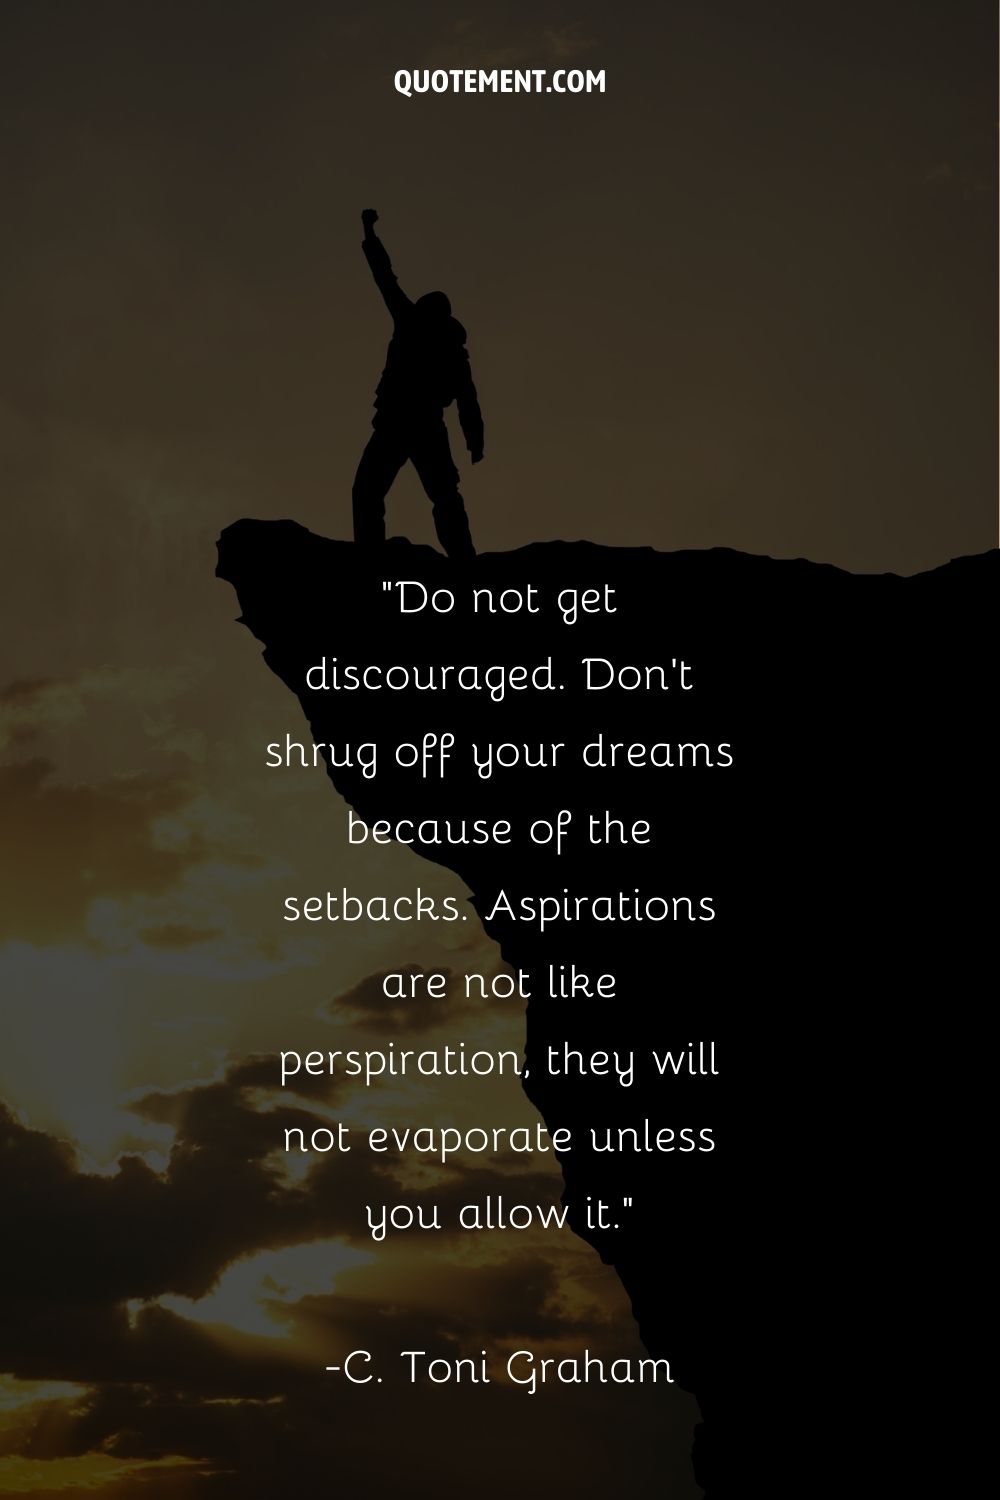 Do not get discouraged. Don’t shrug off your dreams because of the setbacks.